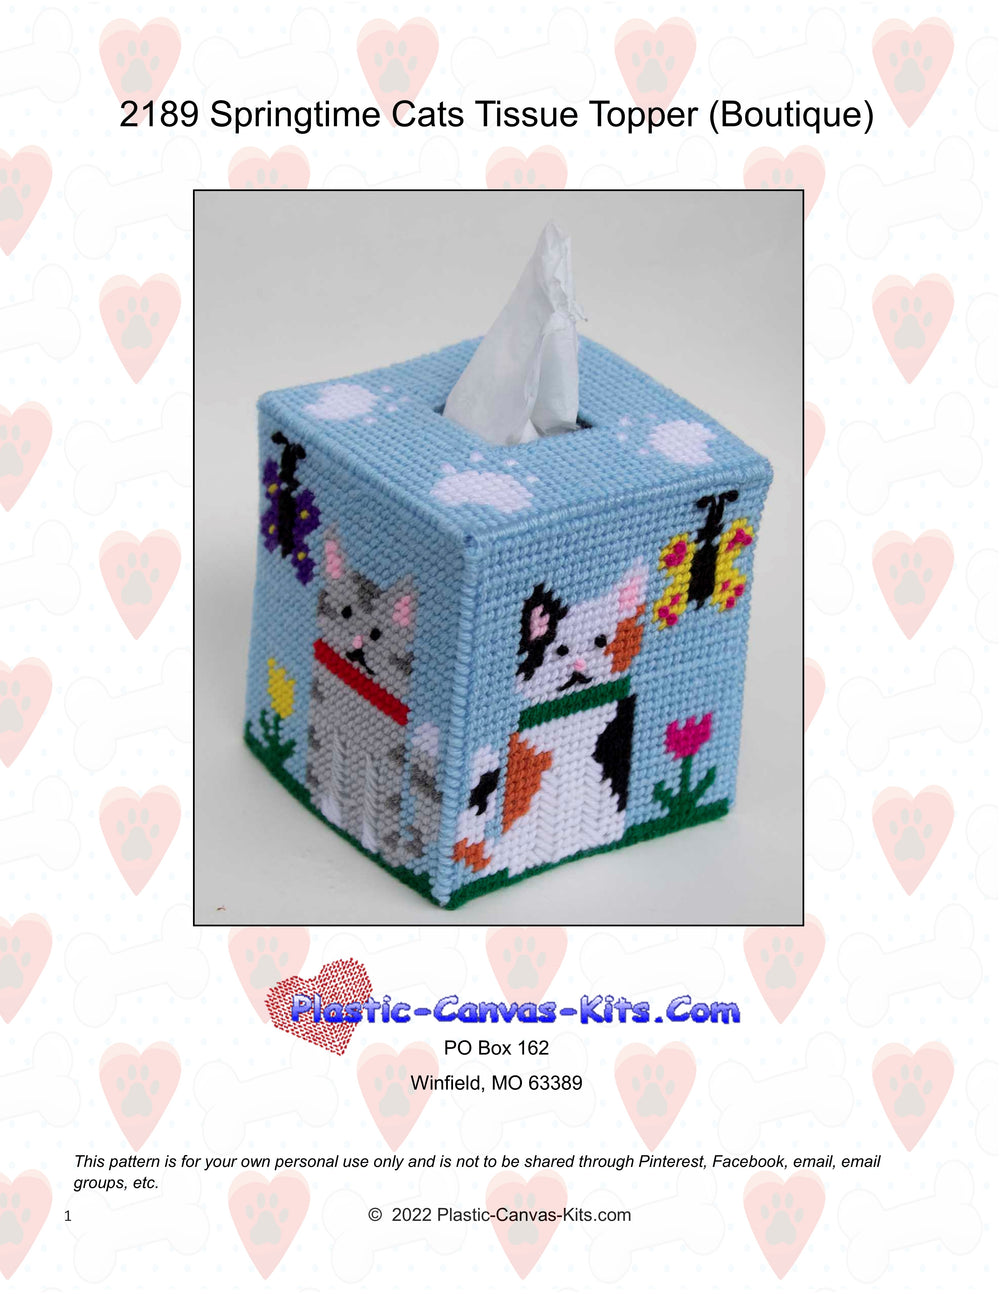 Spring Cats Boutique Tissue Topper